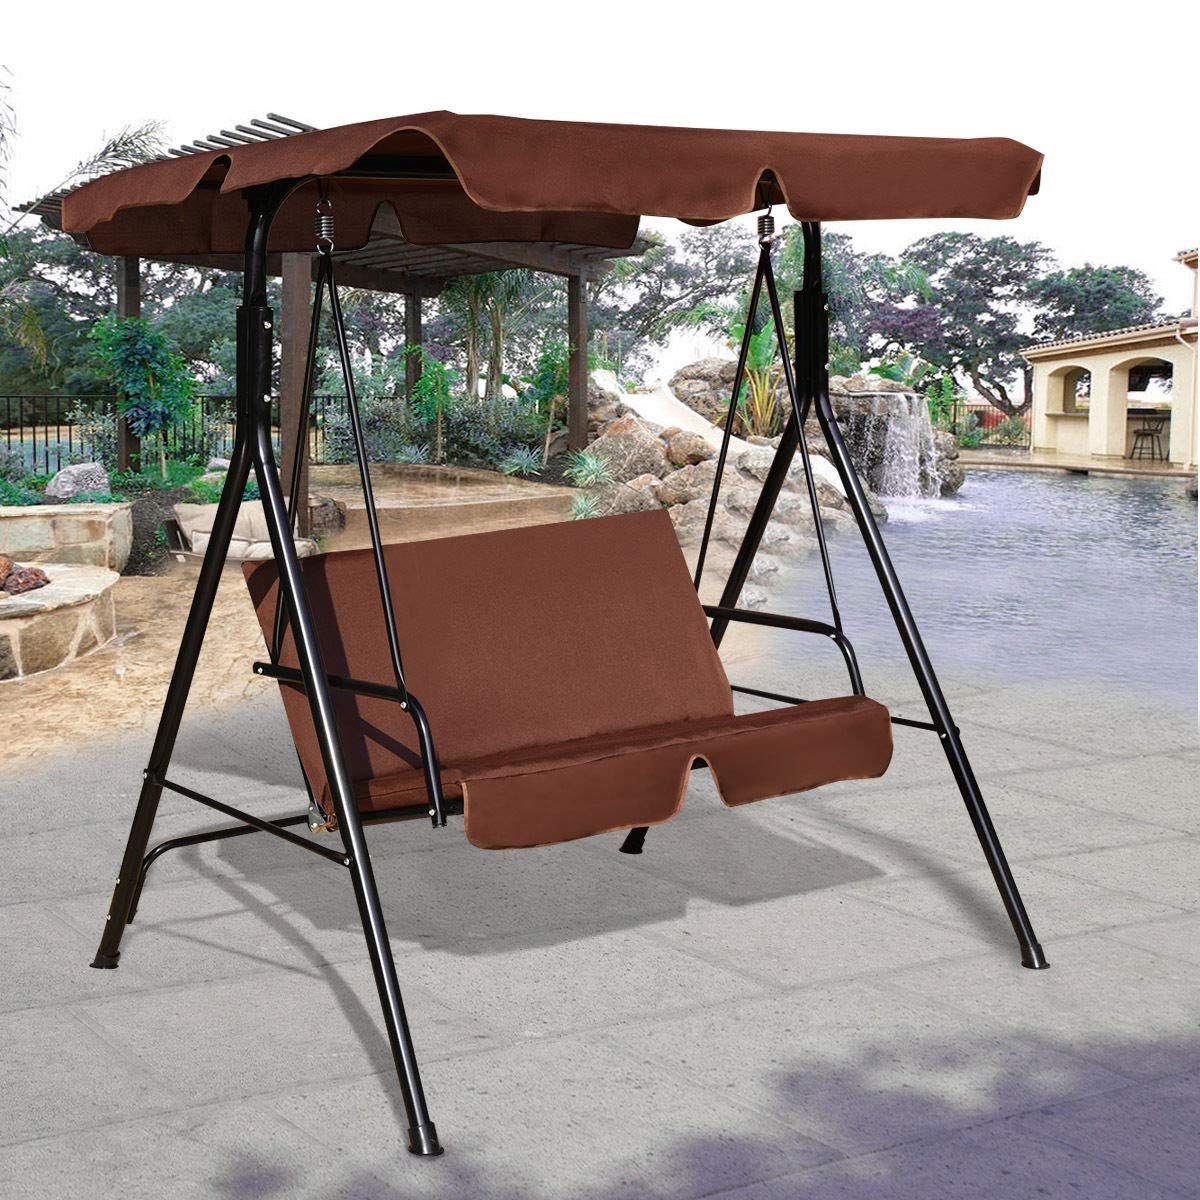 Famous Wicker Glider Outdoor Porch Swings With Stand Within Amazon : Iron Porch Swing With Steel Frame Stand And (View 7 of 30)